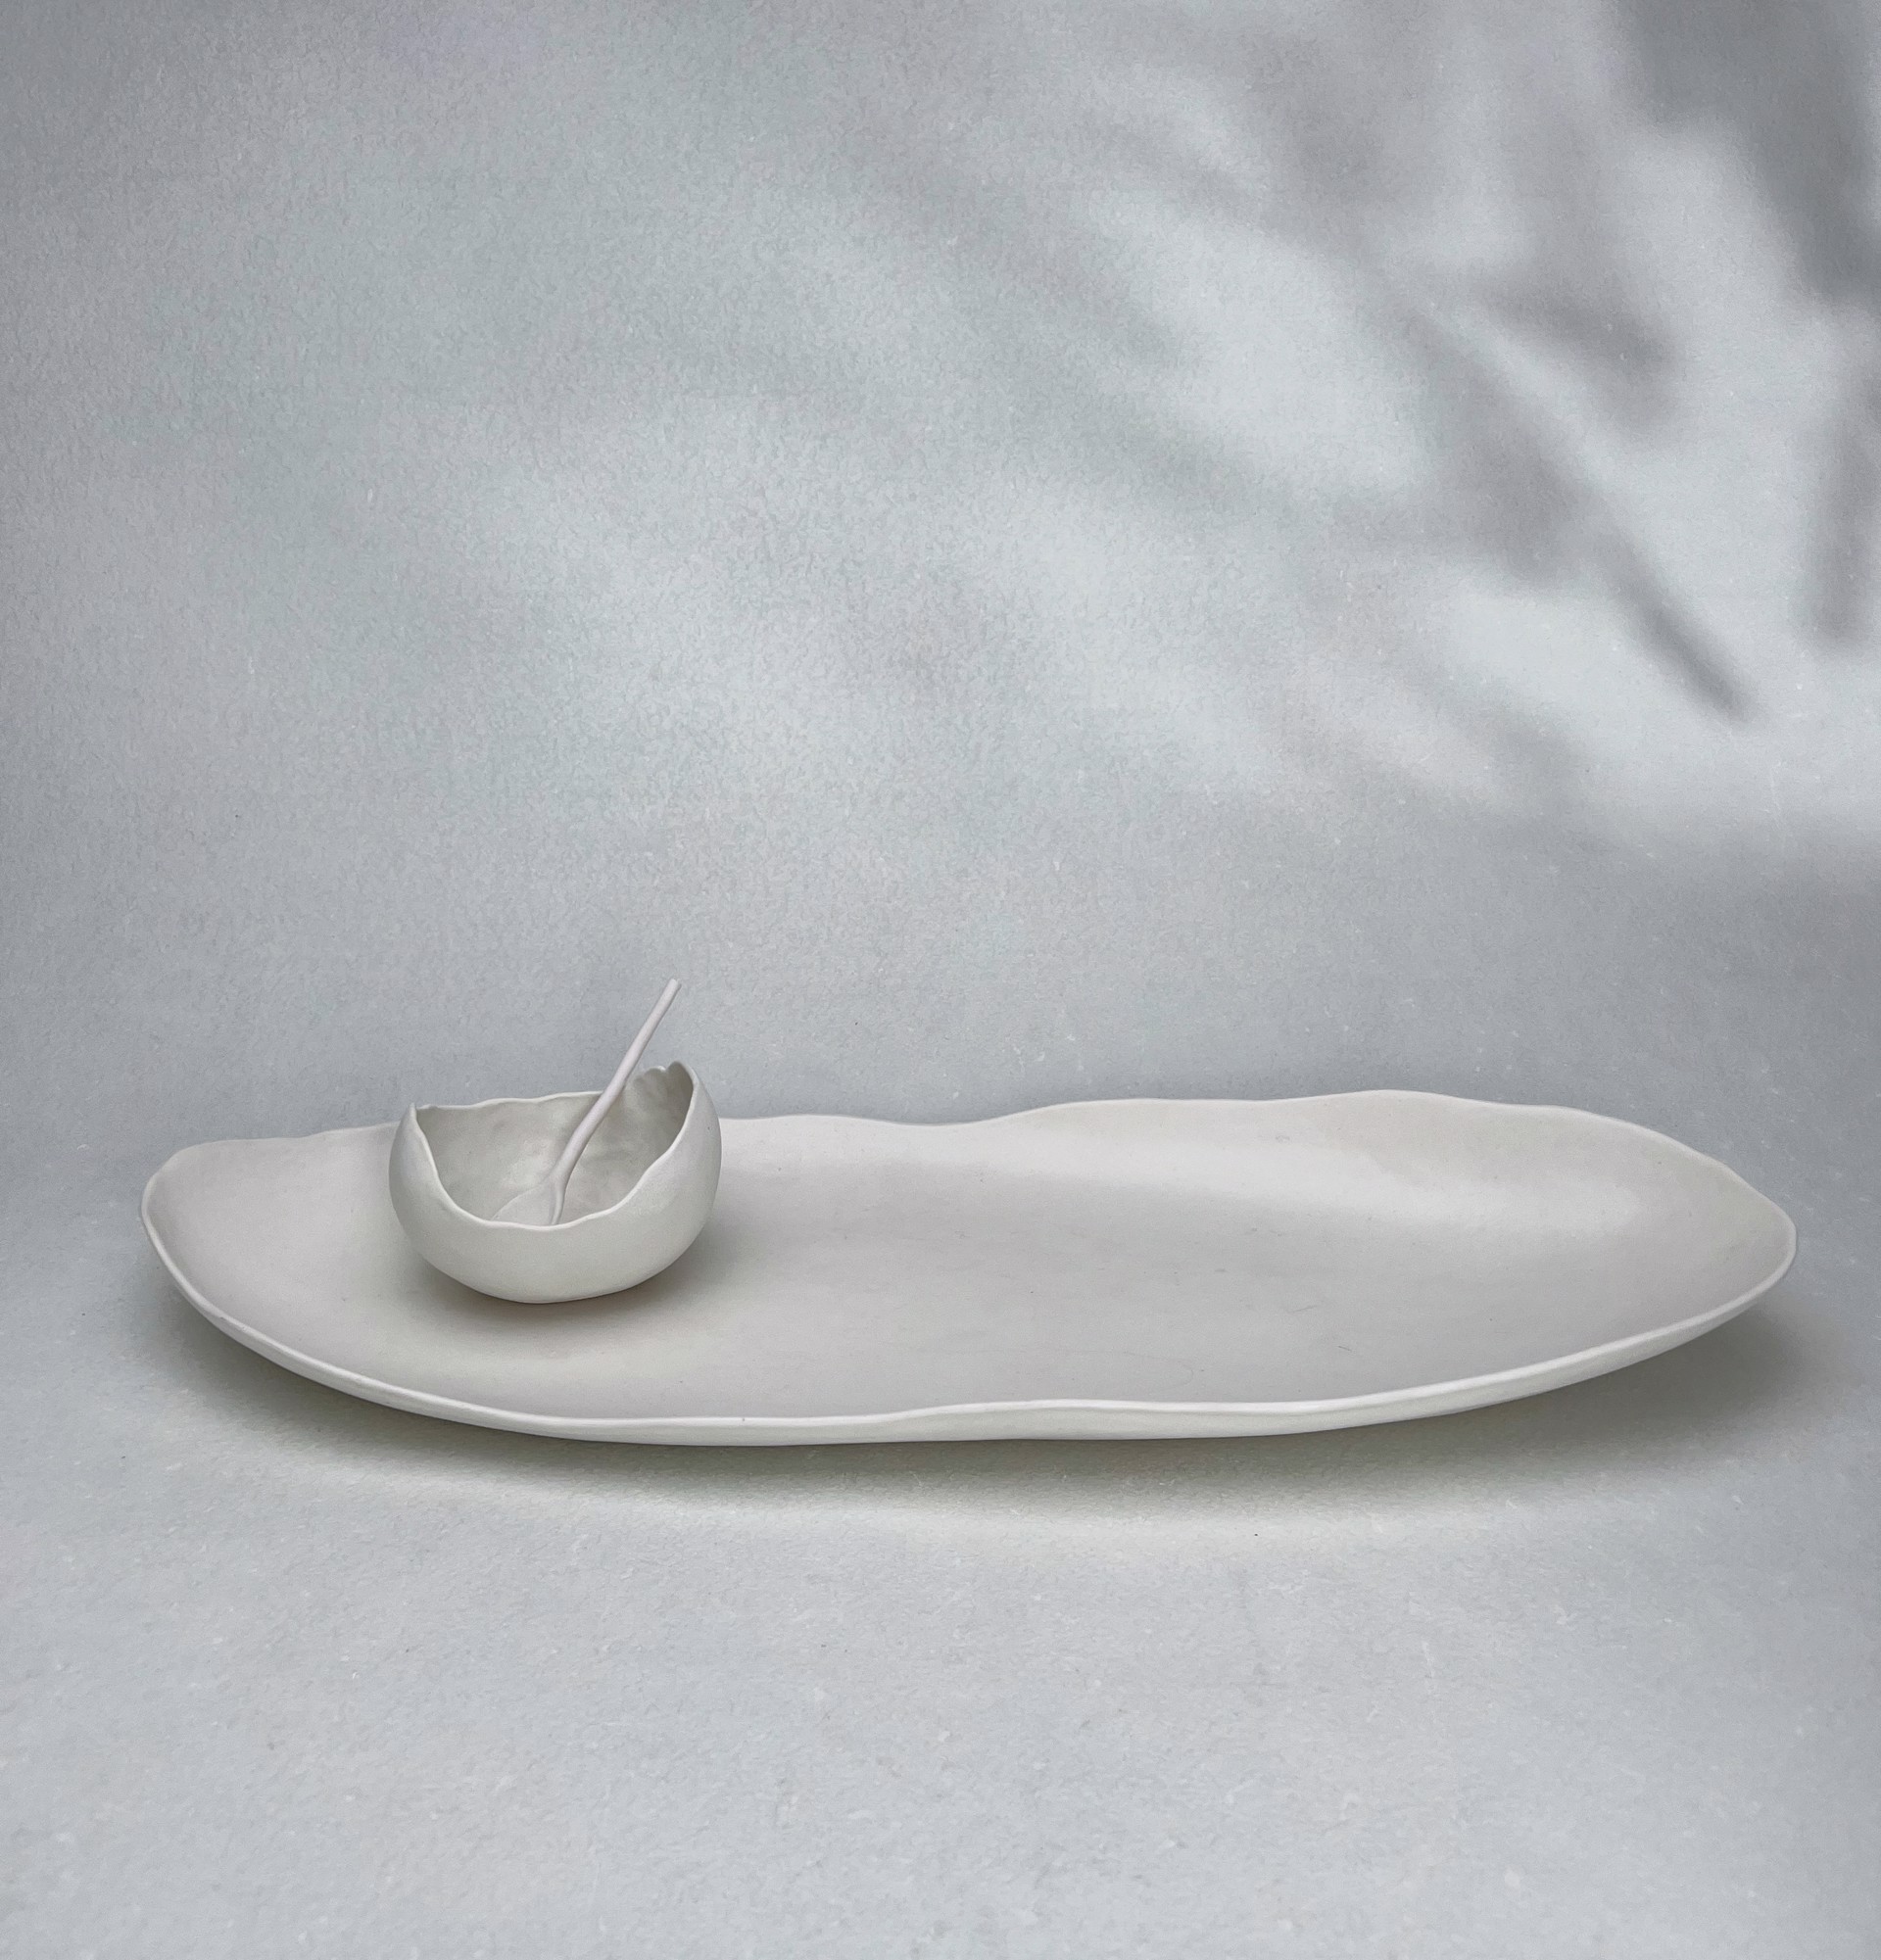 Appetizer Plate and Bowl Set - White by Kate Tremel